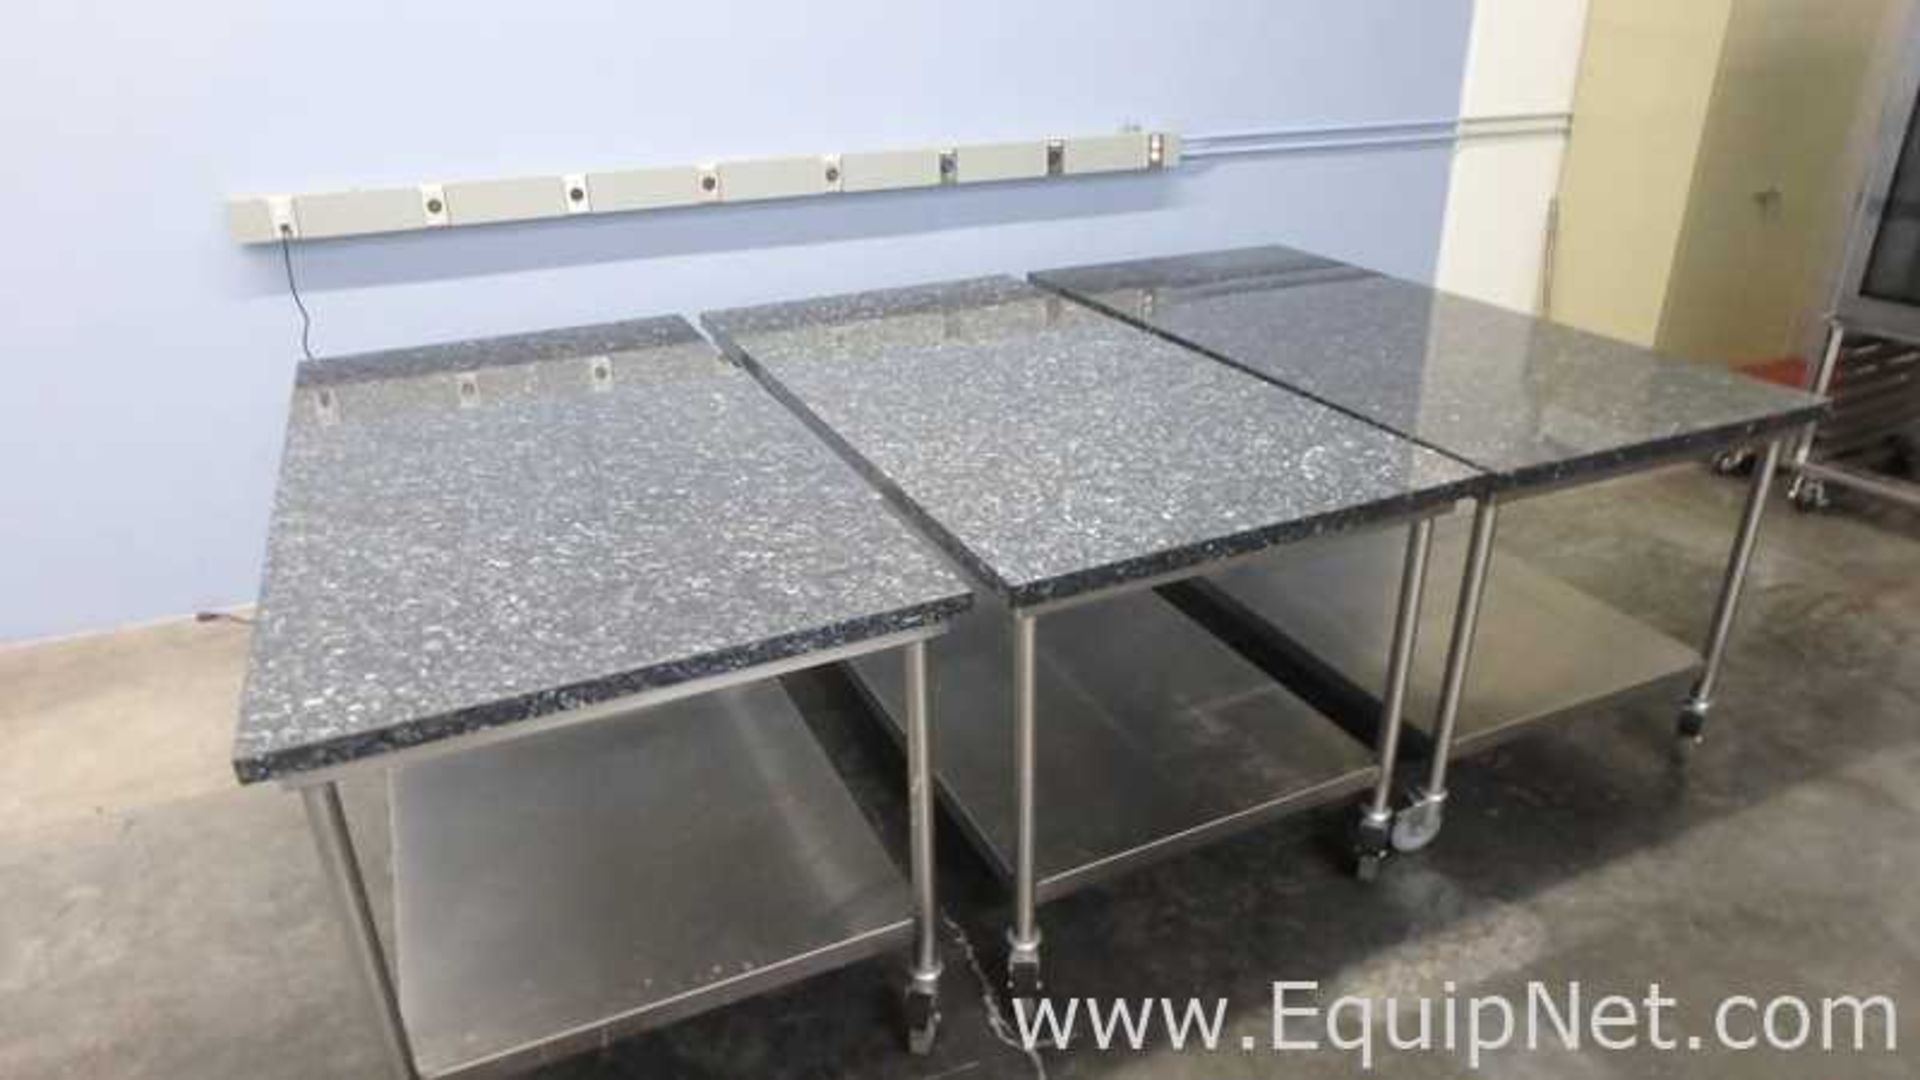 Lot of 3 Granite Top Stainless Steel Work Tables 75in x 39in - Image 7 of 9